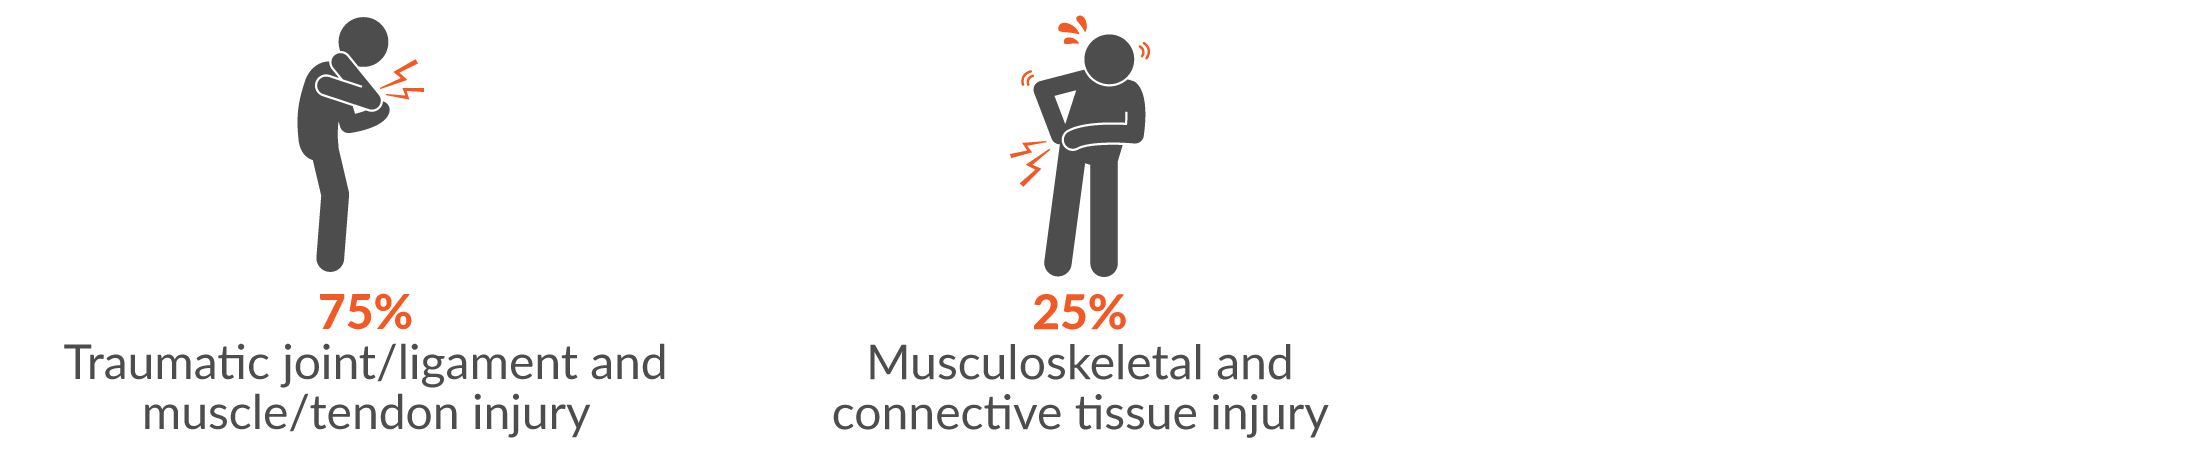 75% traumatic joint/ligament and muscle/tendon injury; and 25% musculoskeletal and connective tissue injury.